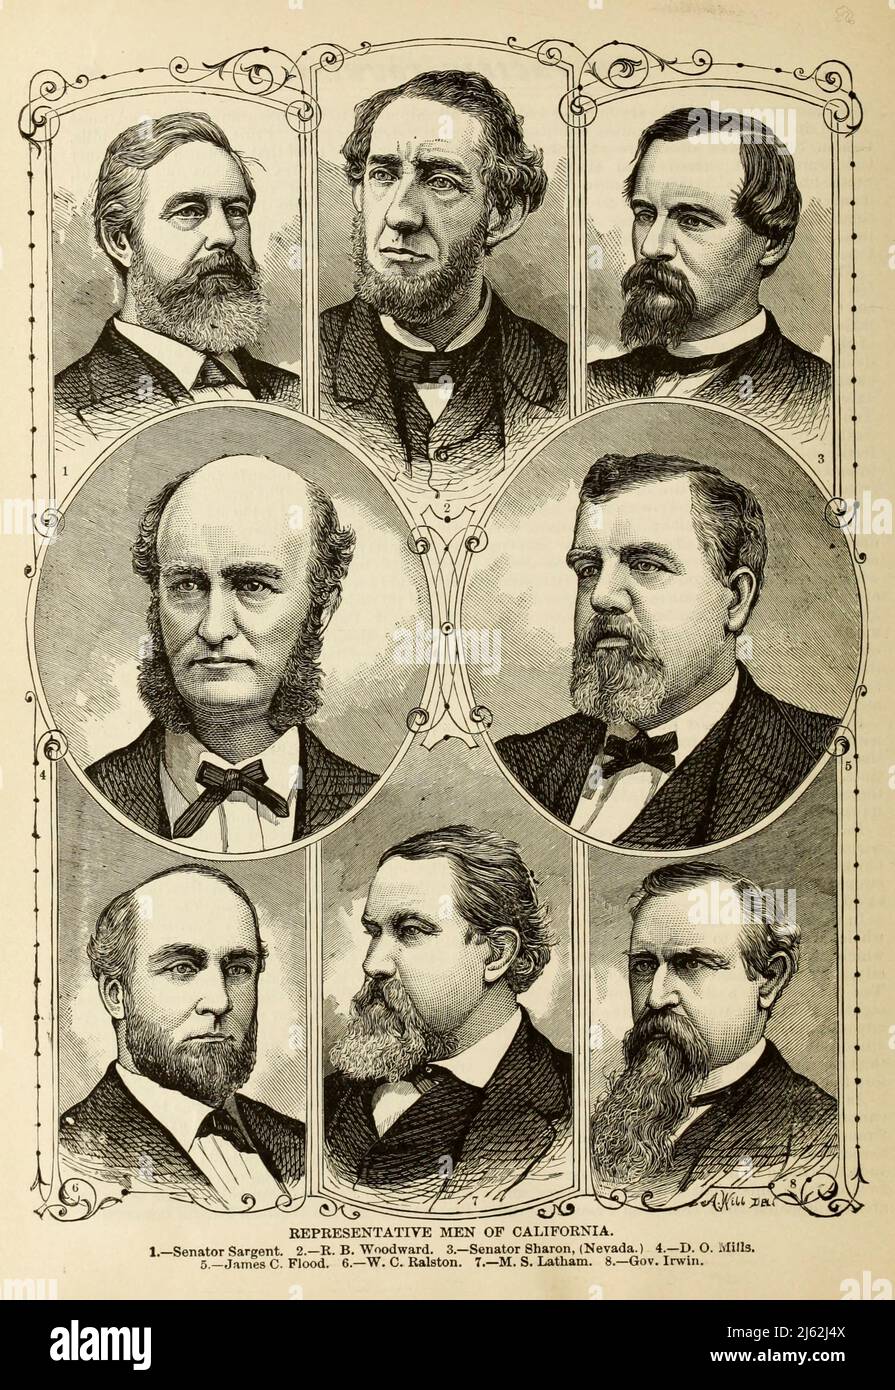 REPRESENTATIVE MEN OF CALIFORNIA. 1. Senator Sargent. 2. R. B. Woodward. 3. Senator Sharon, (Nevada.) 4. D. O. Mills. 5. James C. Flood. 6. W. C. Ralston. 7. M. S. Latham. 8. Gov. Irwin. from the book The Pacific tourist : Adams & Bishop's illustrated trans-continental guide of travel, from the Atlantic to the Pacific Ocean : containing full descriptions of railroad routes across the continent, all pleasure resorts and places of most noted scenery in the Far West, also of all cities, towns, villages, U.S. forts, springs, lakes, mountains, routes of summer travel, best localities for hunting, f Stock Photo